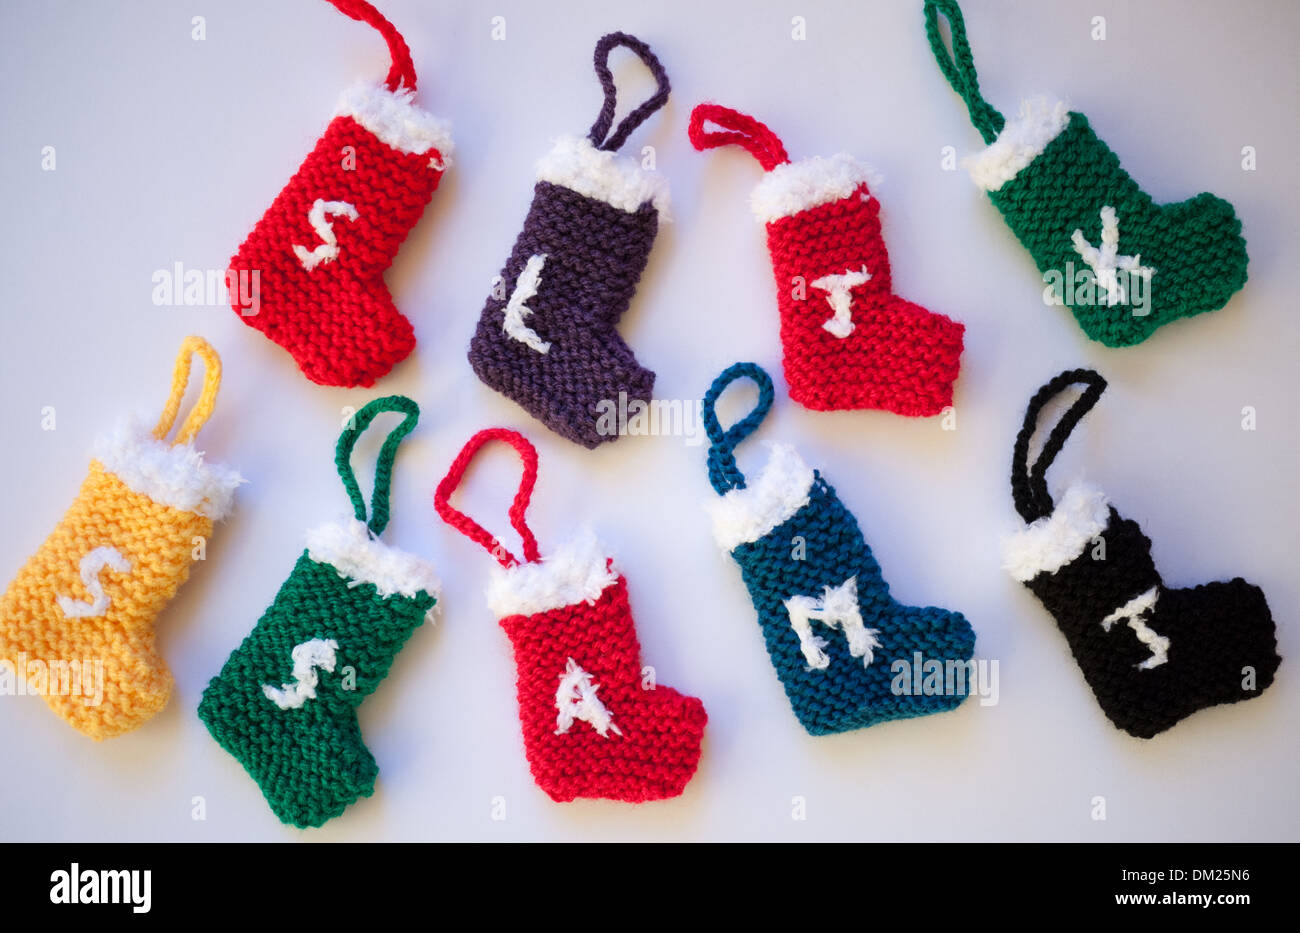 Knitted Christmas stockings with embroidered initials Stock Photo